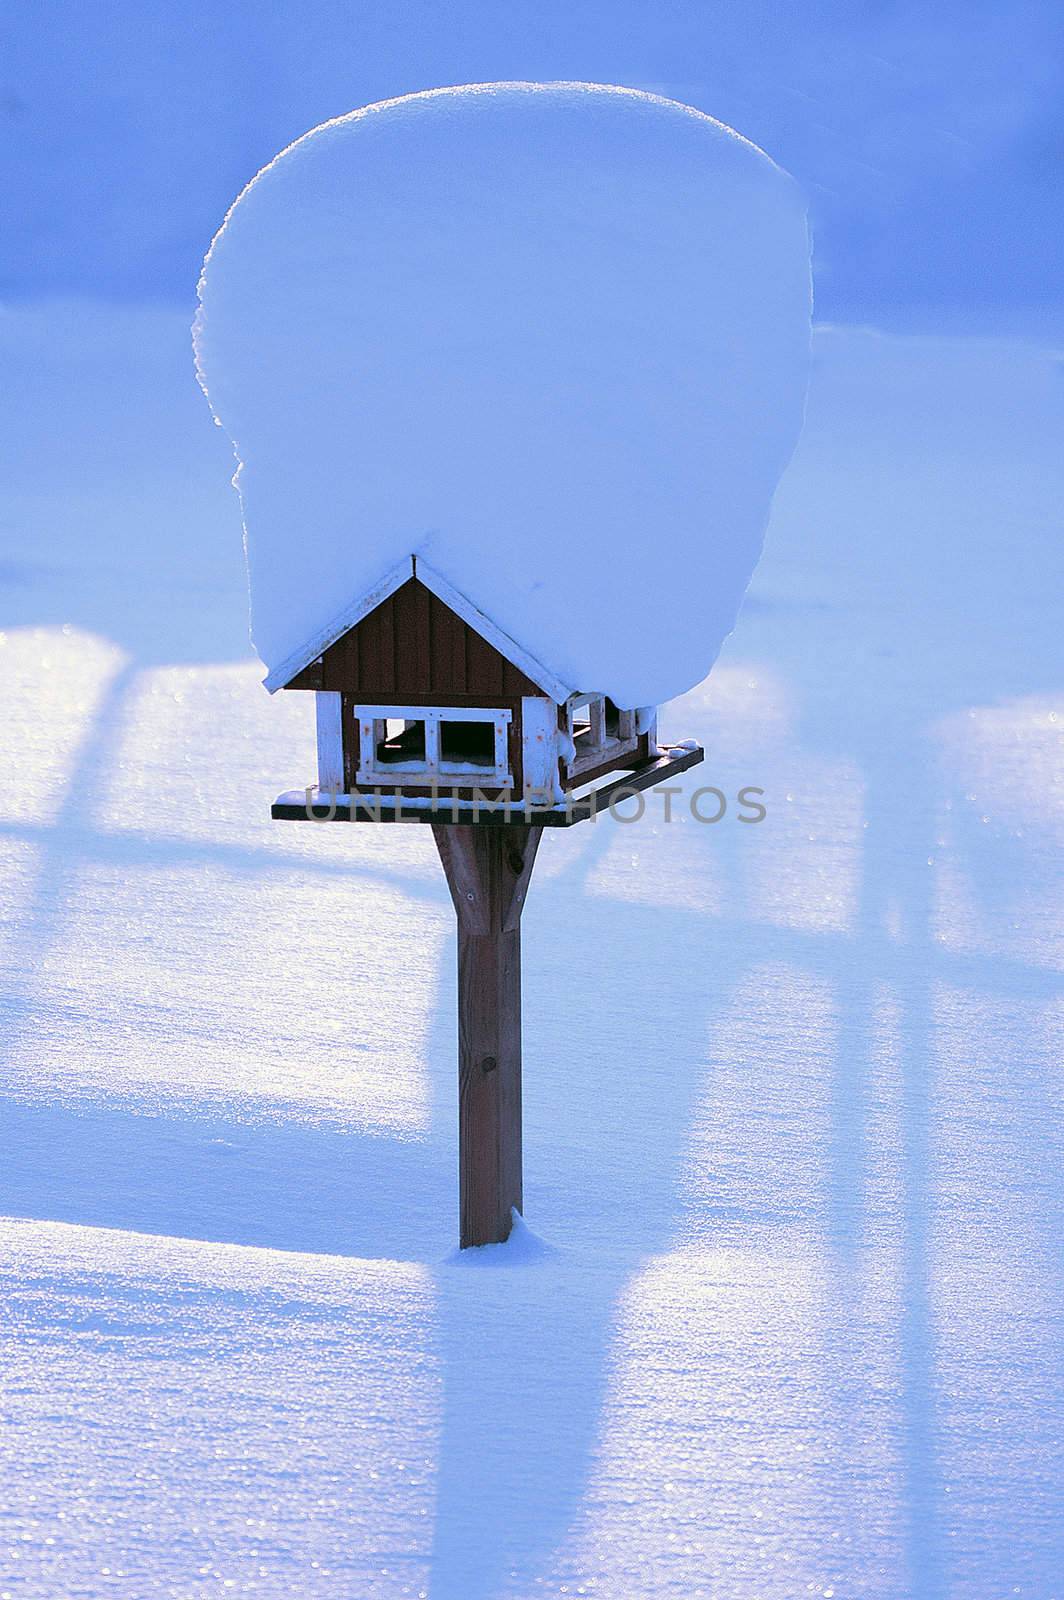 Bird feeders with much snow on the roof